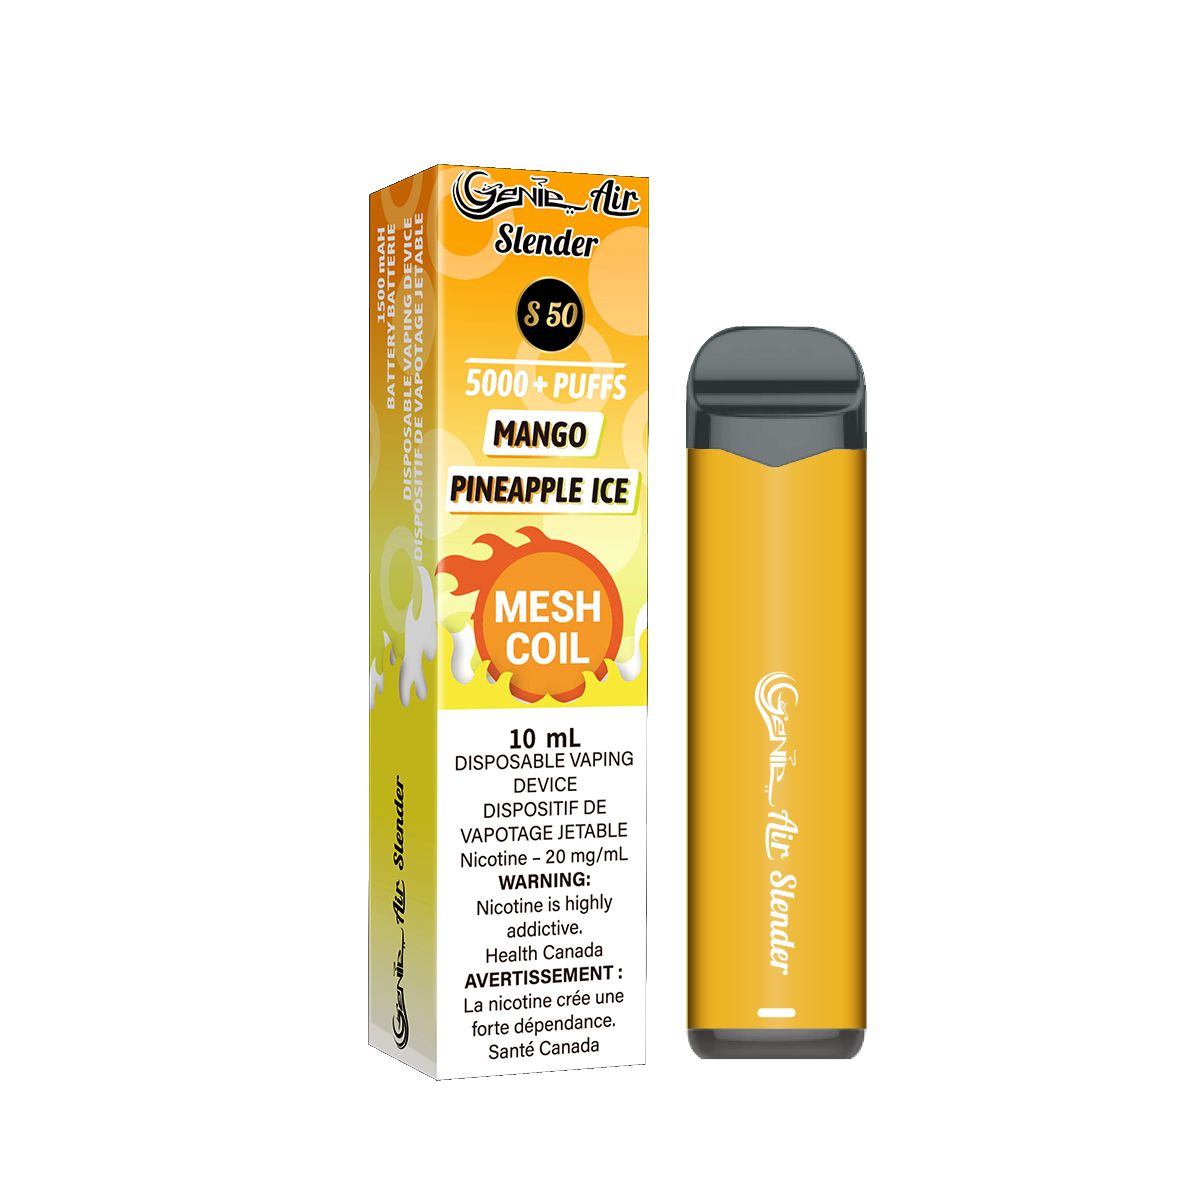 Genie slender 5000 Puffs per 1 disposable device  Fully charged  2% Salt Nicotine  Battery: 1500 mAh  Mesh Coil Technology s50 Mango pineapple ice